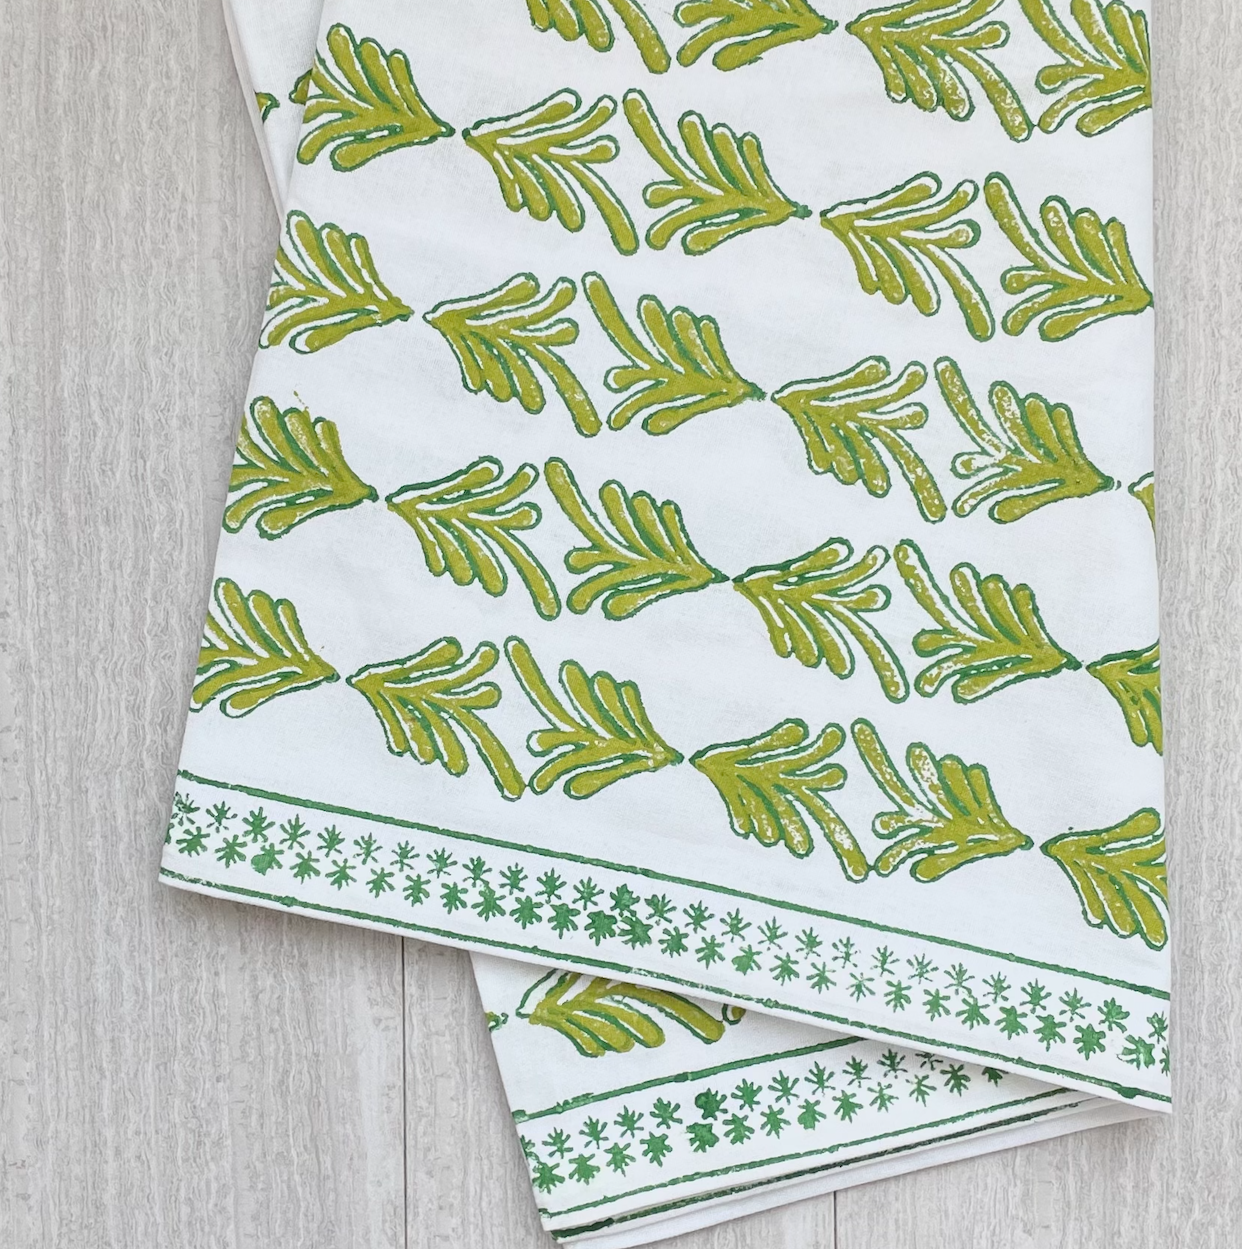 Table Runners - Palmetto, Cactus & Kelly Green by Mended